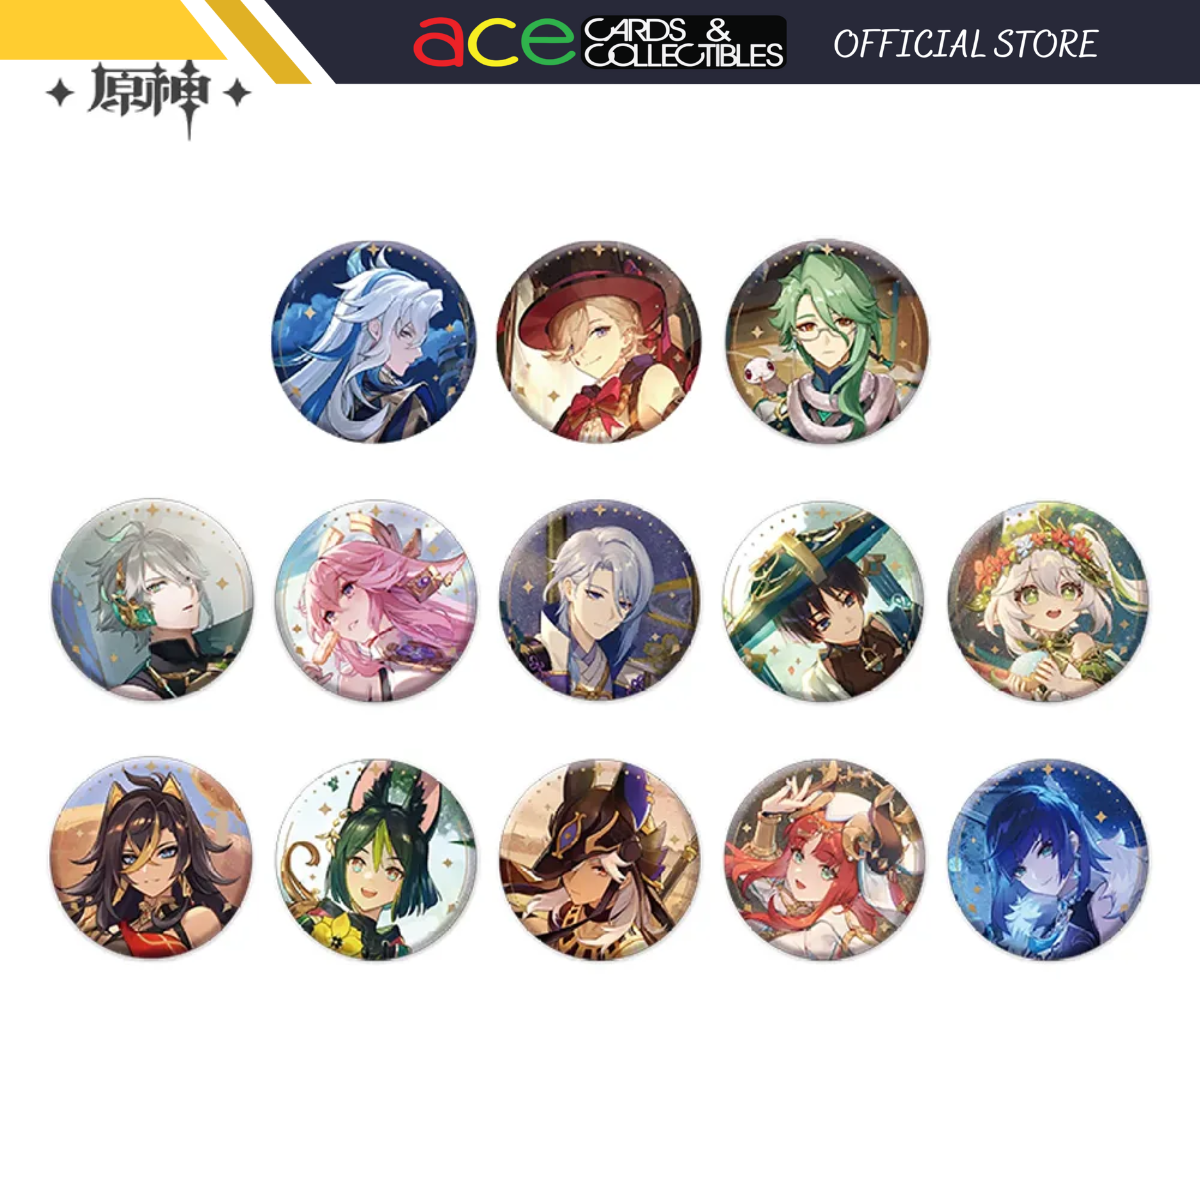 miHoYo Genshin Impact Anecdote Series Characters Badge-Neuvillette-miHoYo-Ace Cards & Collectibles